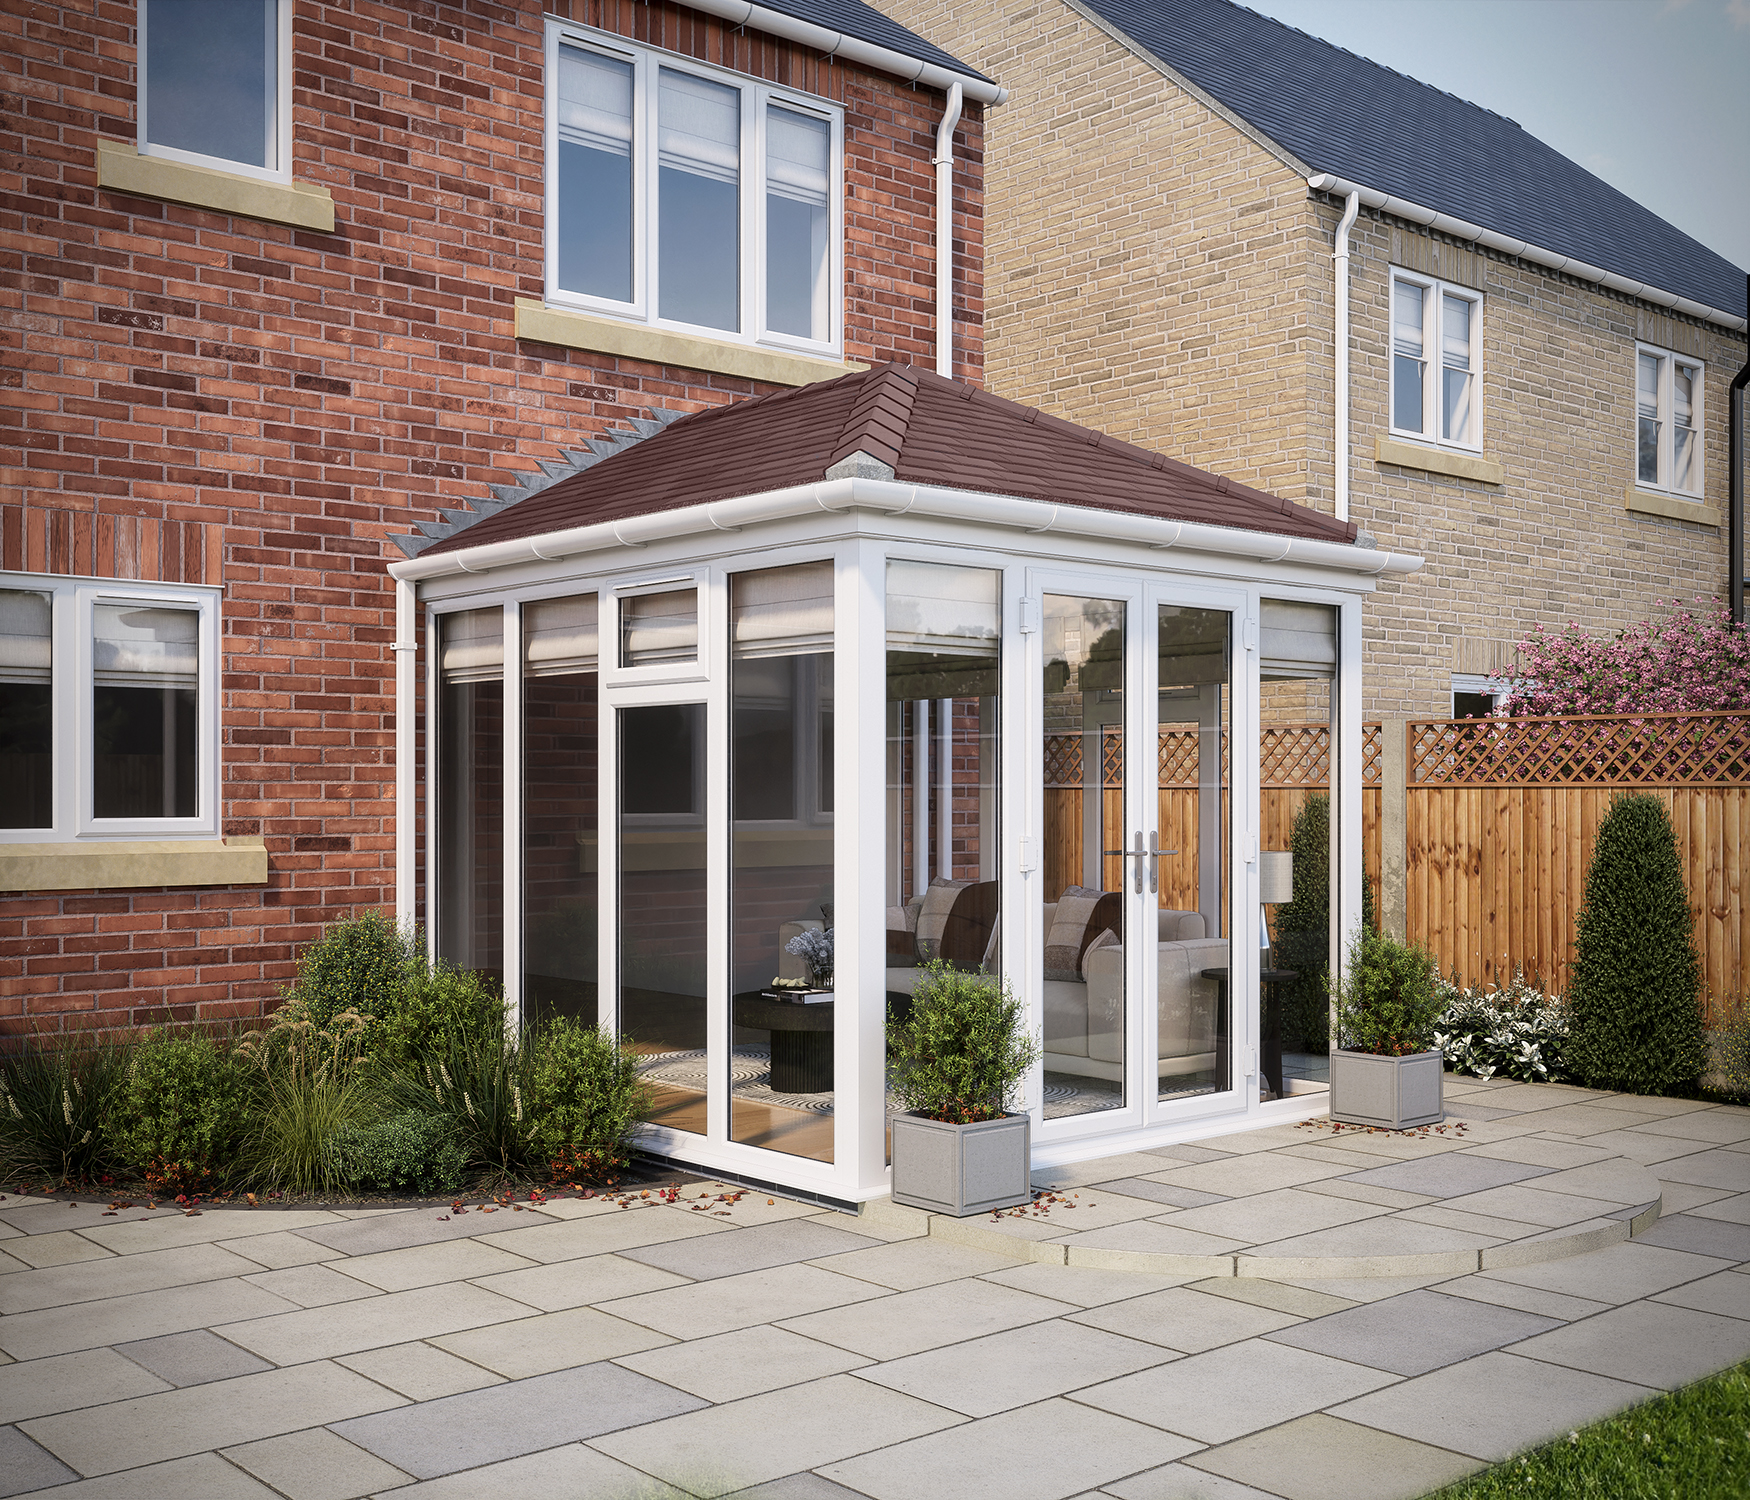 Image of SOLid Roof Full Height Edwardian Conservatory White Frames with Rustic Brown Tiles - 13 x 13ft